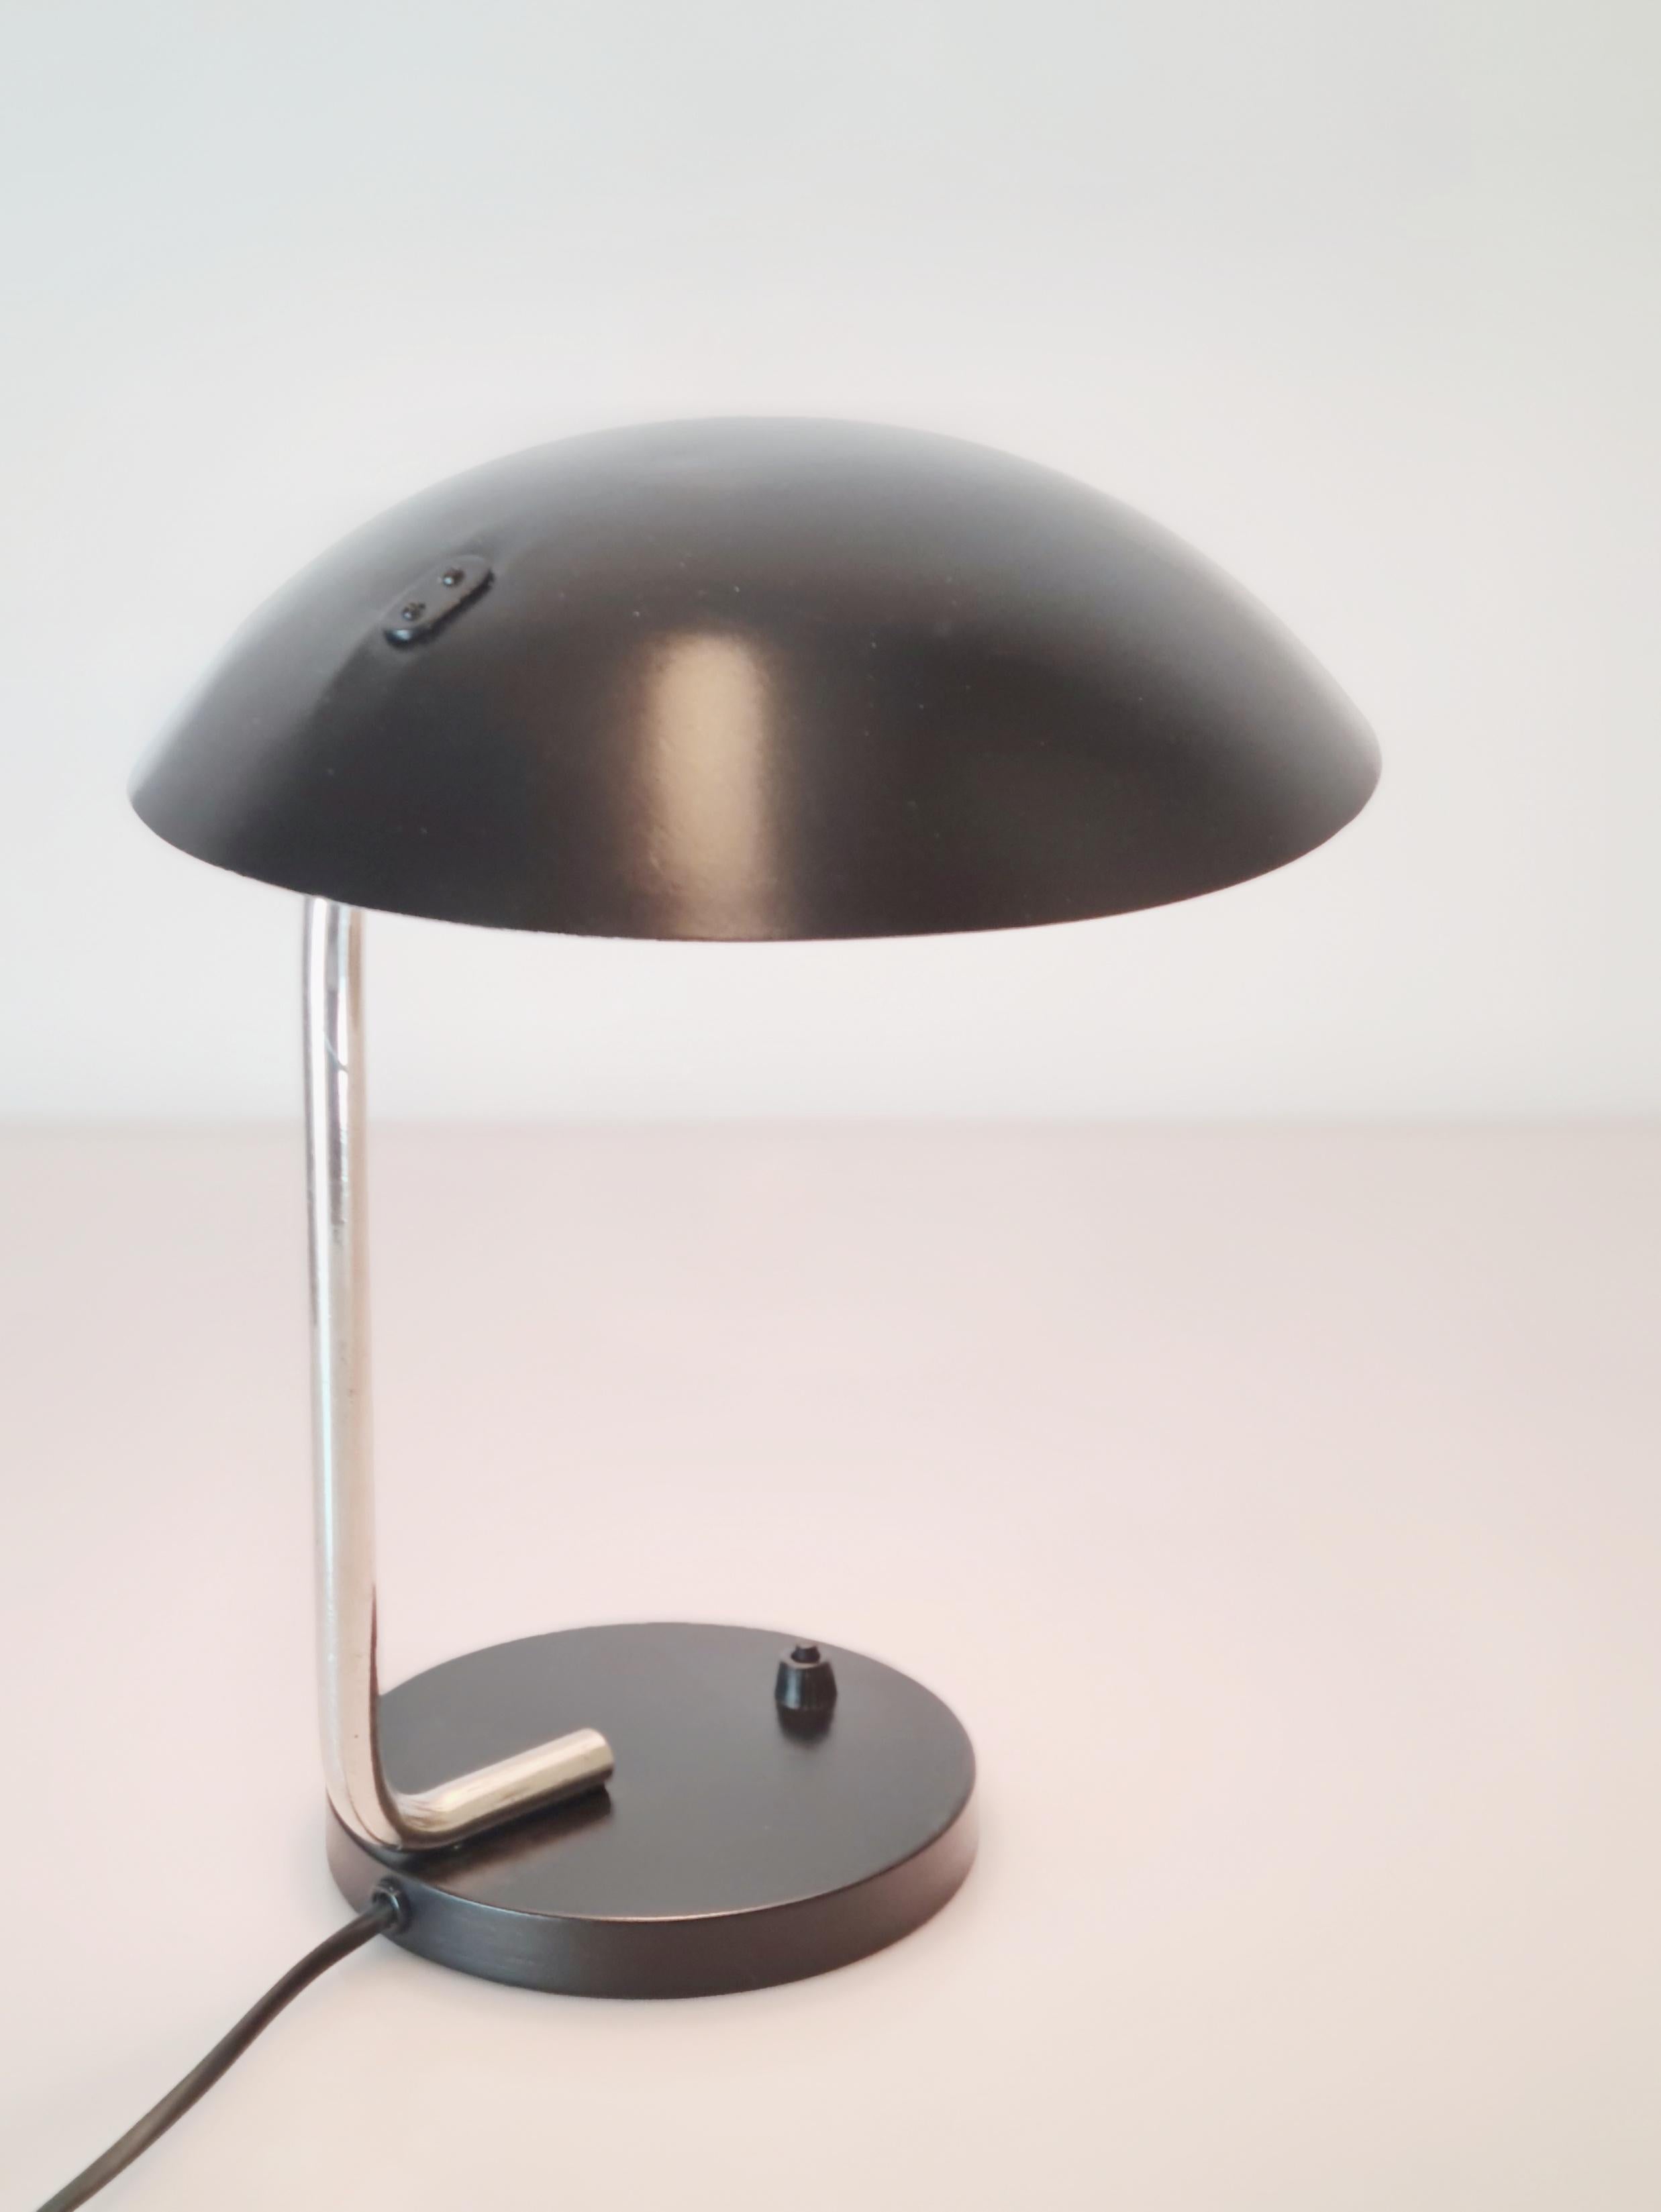 This table lamp is a part of the early Tynell lamps from the 1930s. The combination of stainless steel and black paint separates this lamp from the common brass lamps. Simple yet elegant design makes this lamp suitable for almost any decor. The lamp